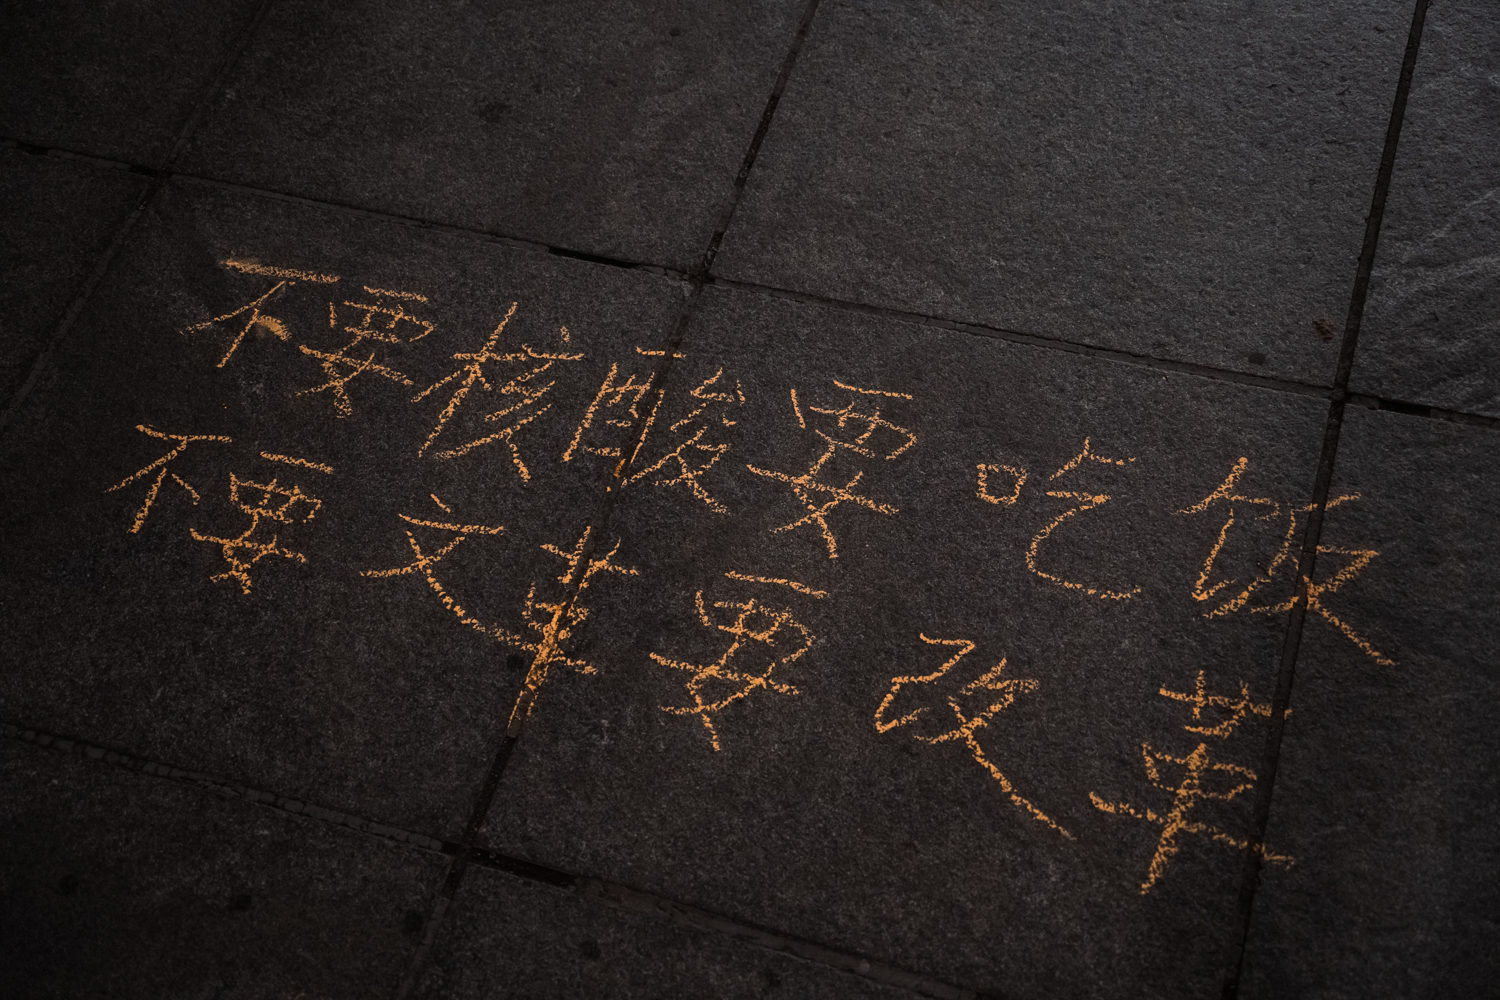 Writings on the ground using orange chalk that reads “Say no to compulsory COVID testing, say yes to livelihood. Say no to culture revolution, say yes to reform” in Chinese.